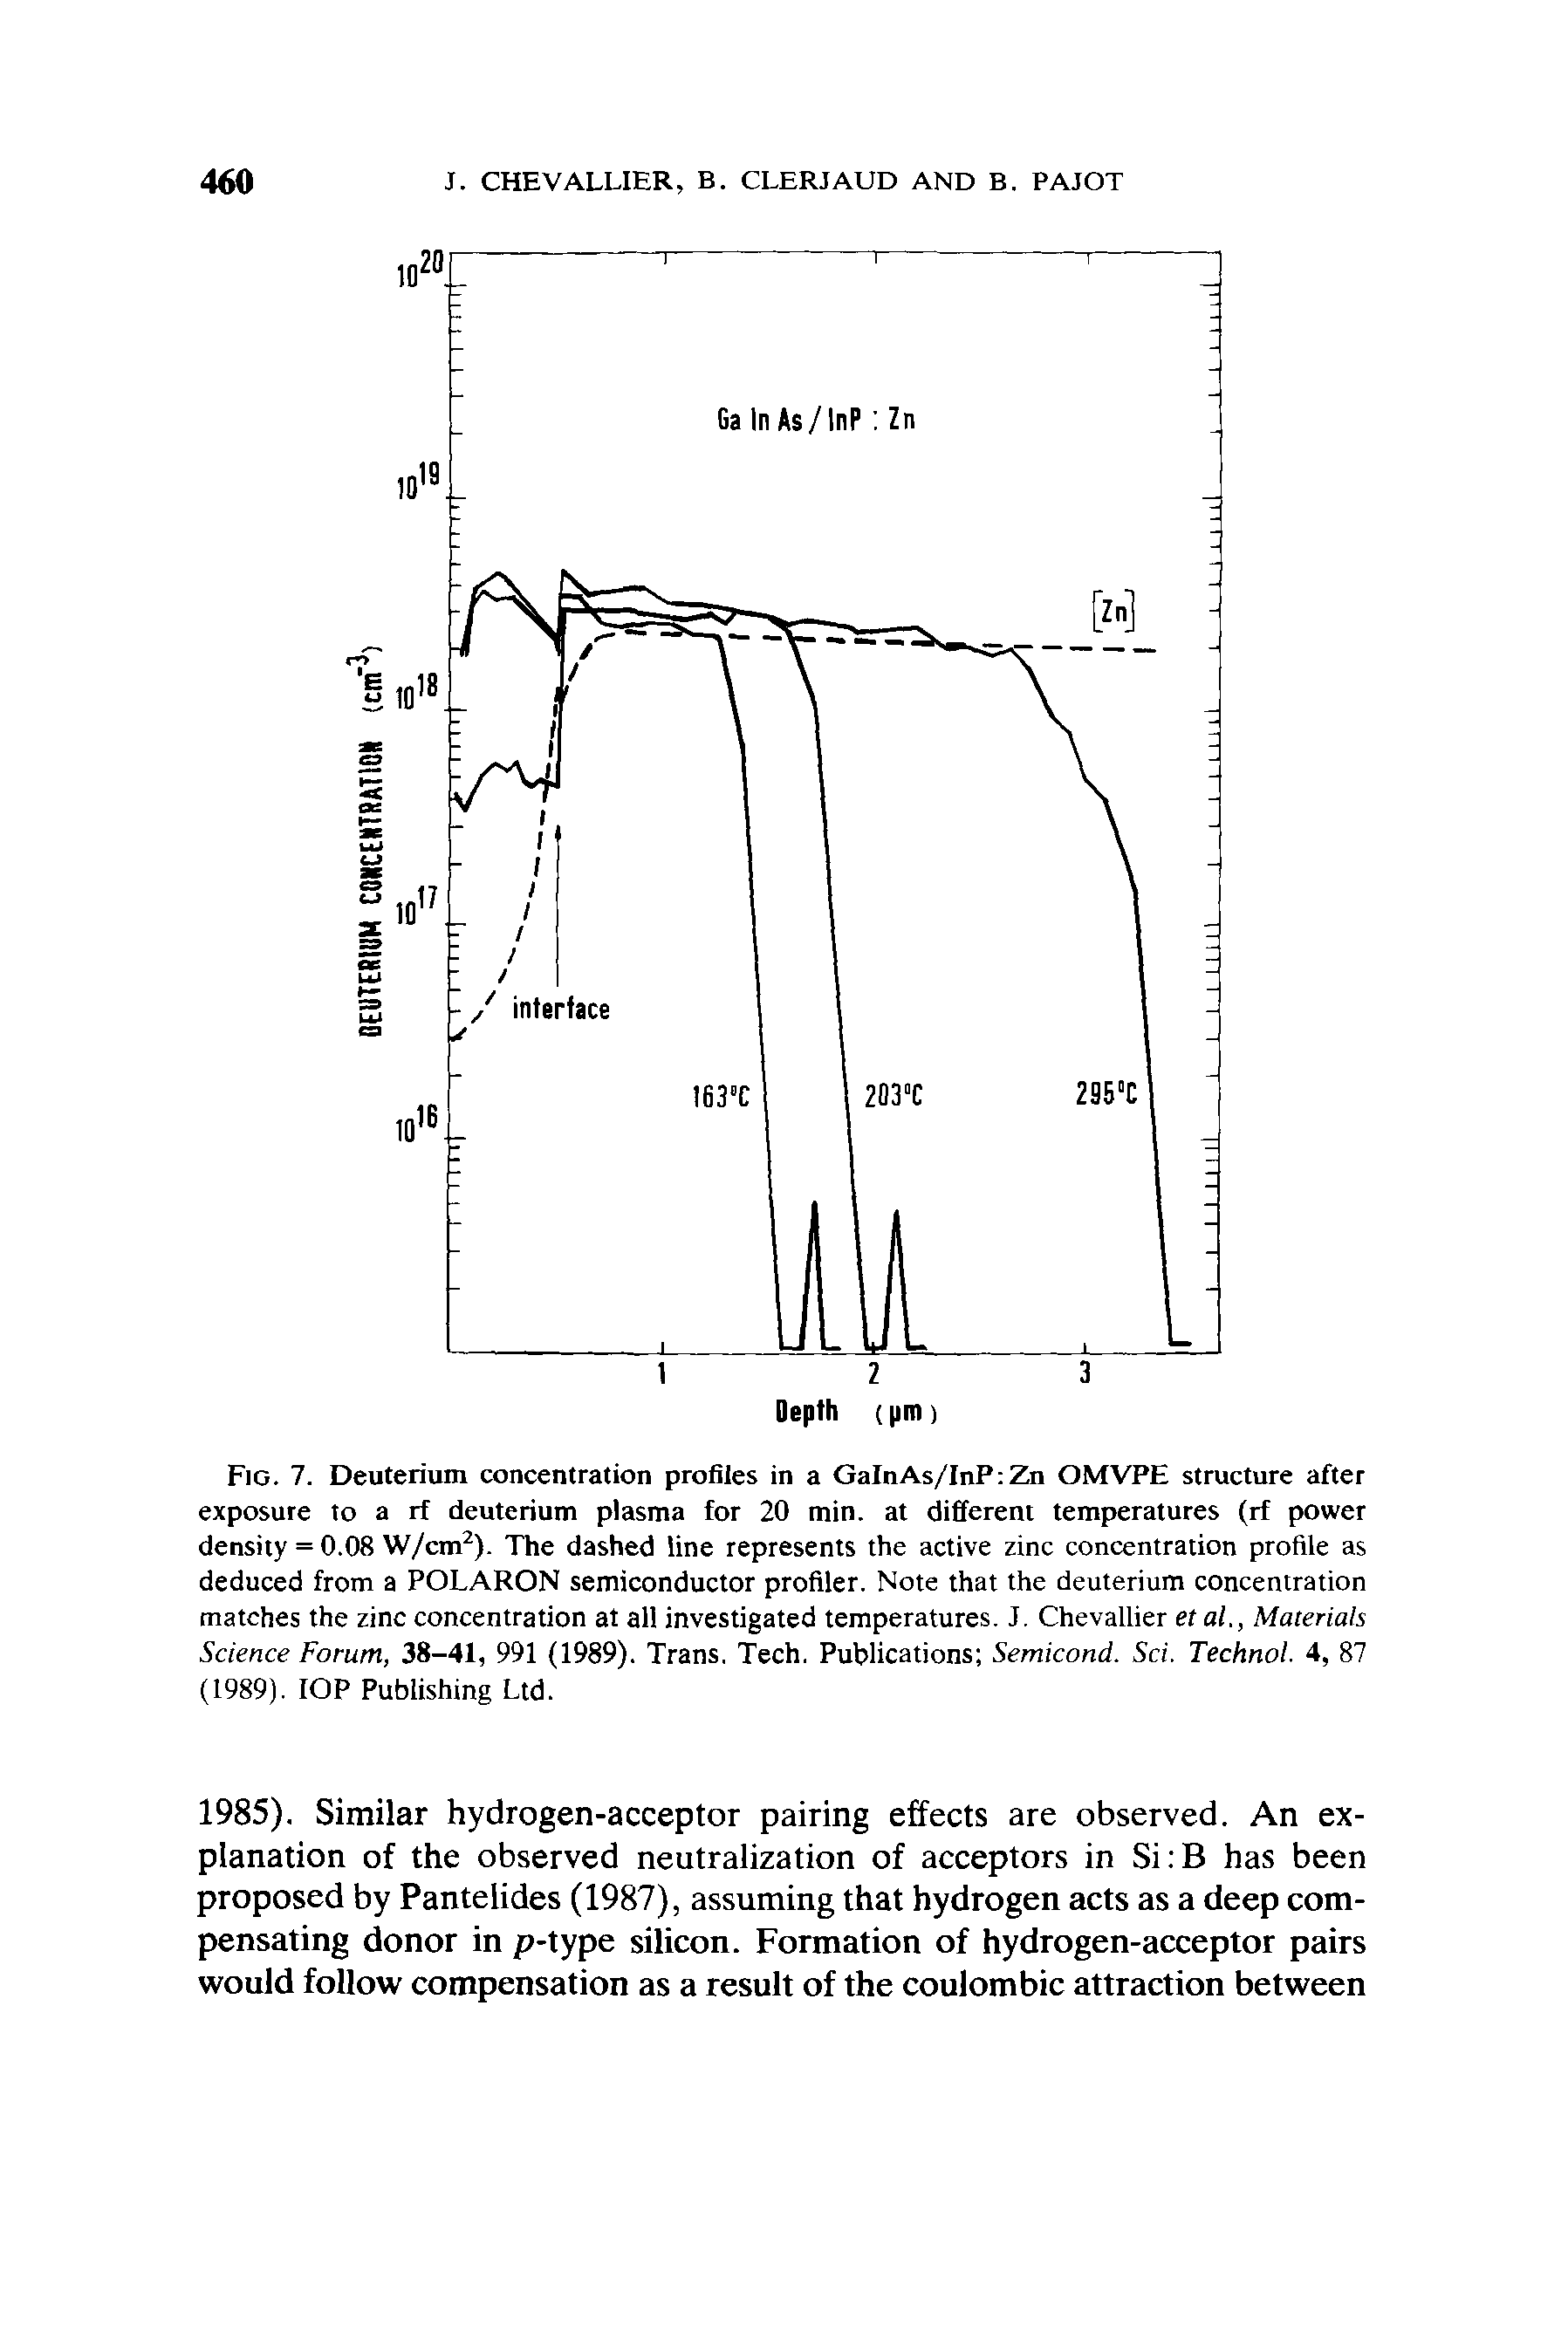 Fig. 7. Deuterium concentration profiles in a GaInAs/InP Zn OMVPE structure after exposure to a rf deuterium plasma for 20 min. at different temperatures (rf power density = 0.08 W/cm2). The dashed line represents the active zinc concentration profile as deduced from a POLARON semiconductor profiler. Note that the deuterium concentration matches the zinc concentration at all investigated temperatures. J. Chevallier et al., Materials Science Forum, 38-41, 991 (1989). Trans. Tech. Publications Semicond. Sci. Technol. 4, 87 (1989). IOP Publishing Ltd.